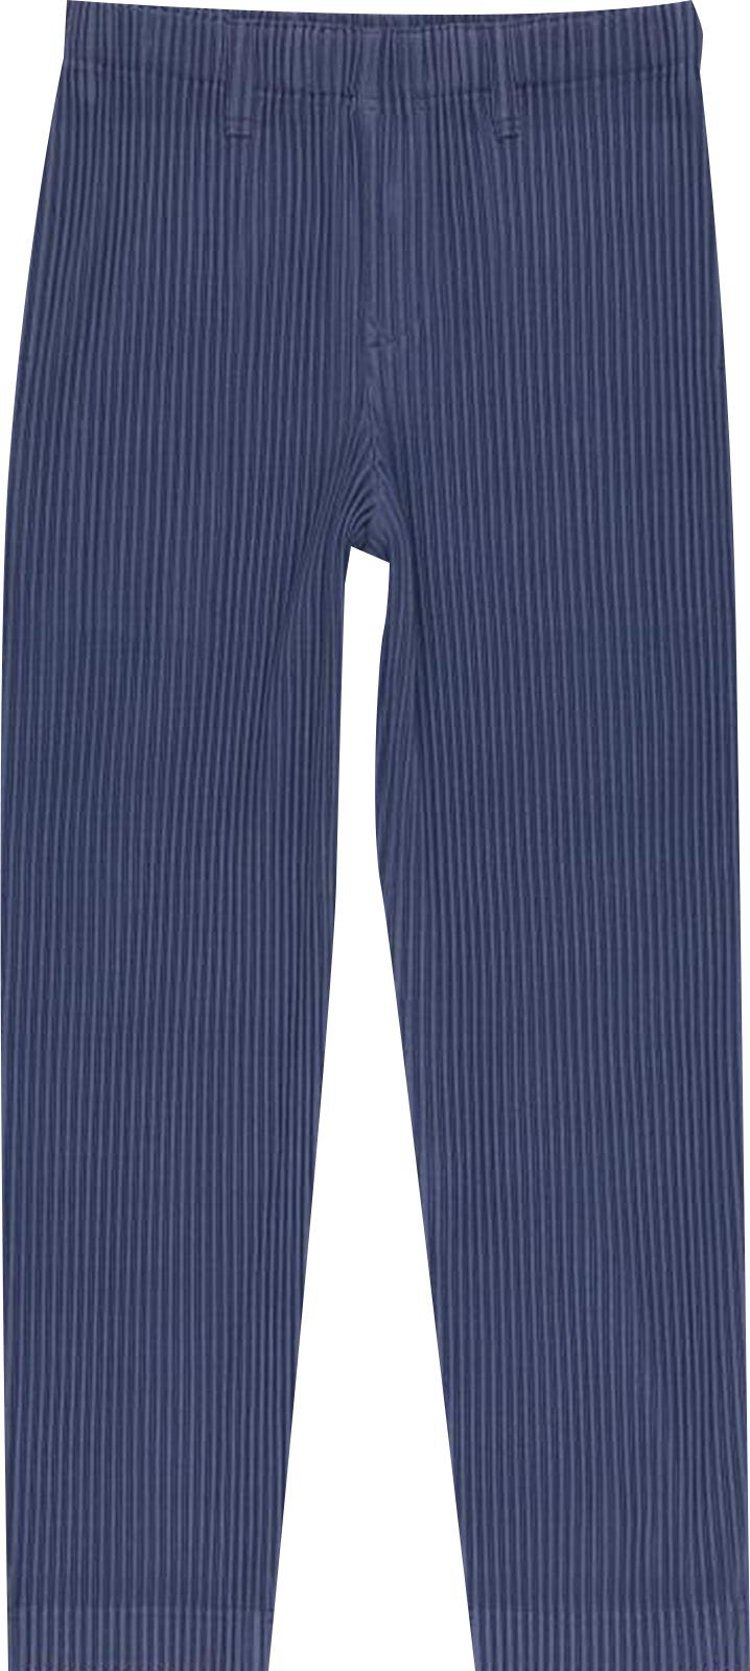 Homme Plissé Issey Miyake Tailored Pleats 2 Pant 'Blue Charcoal'